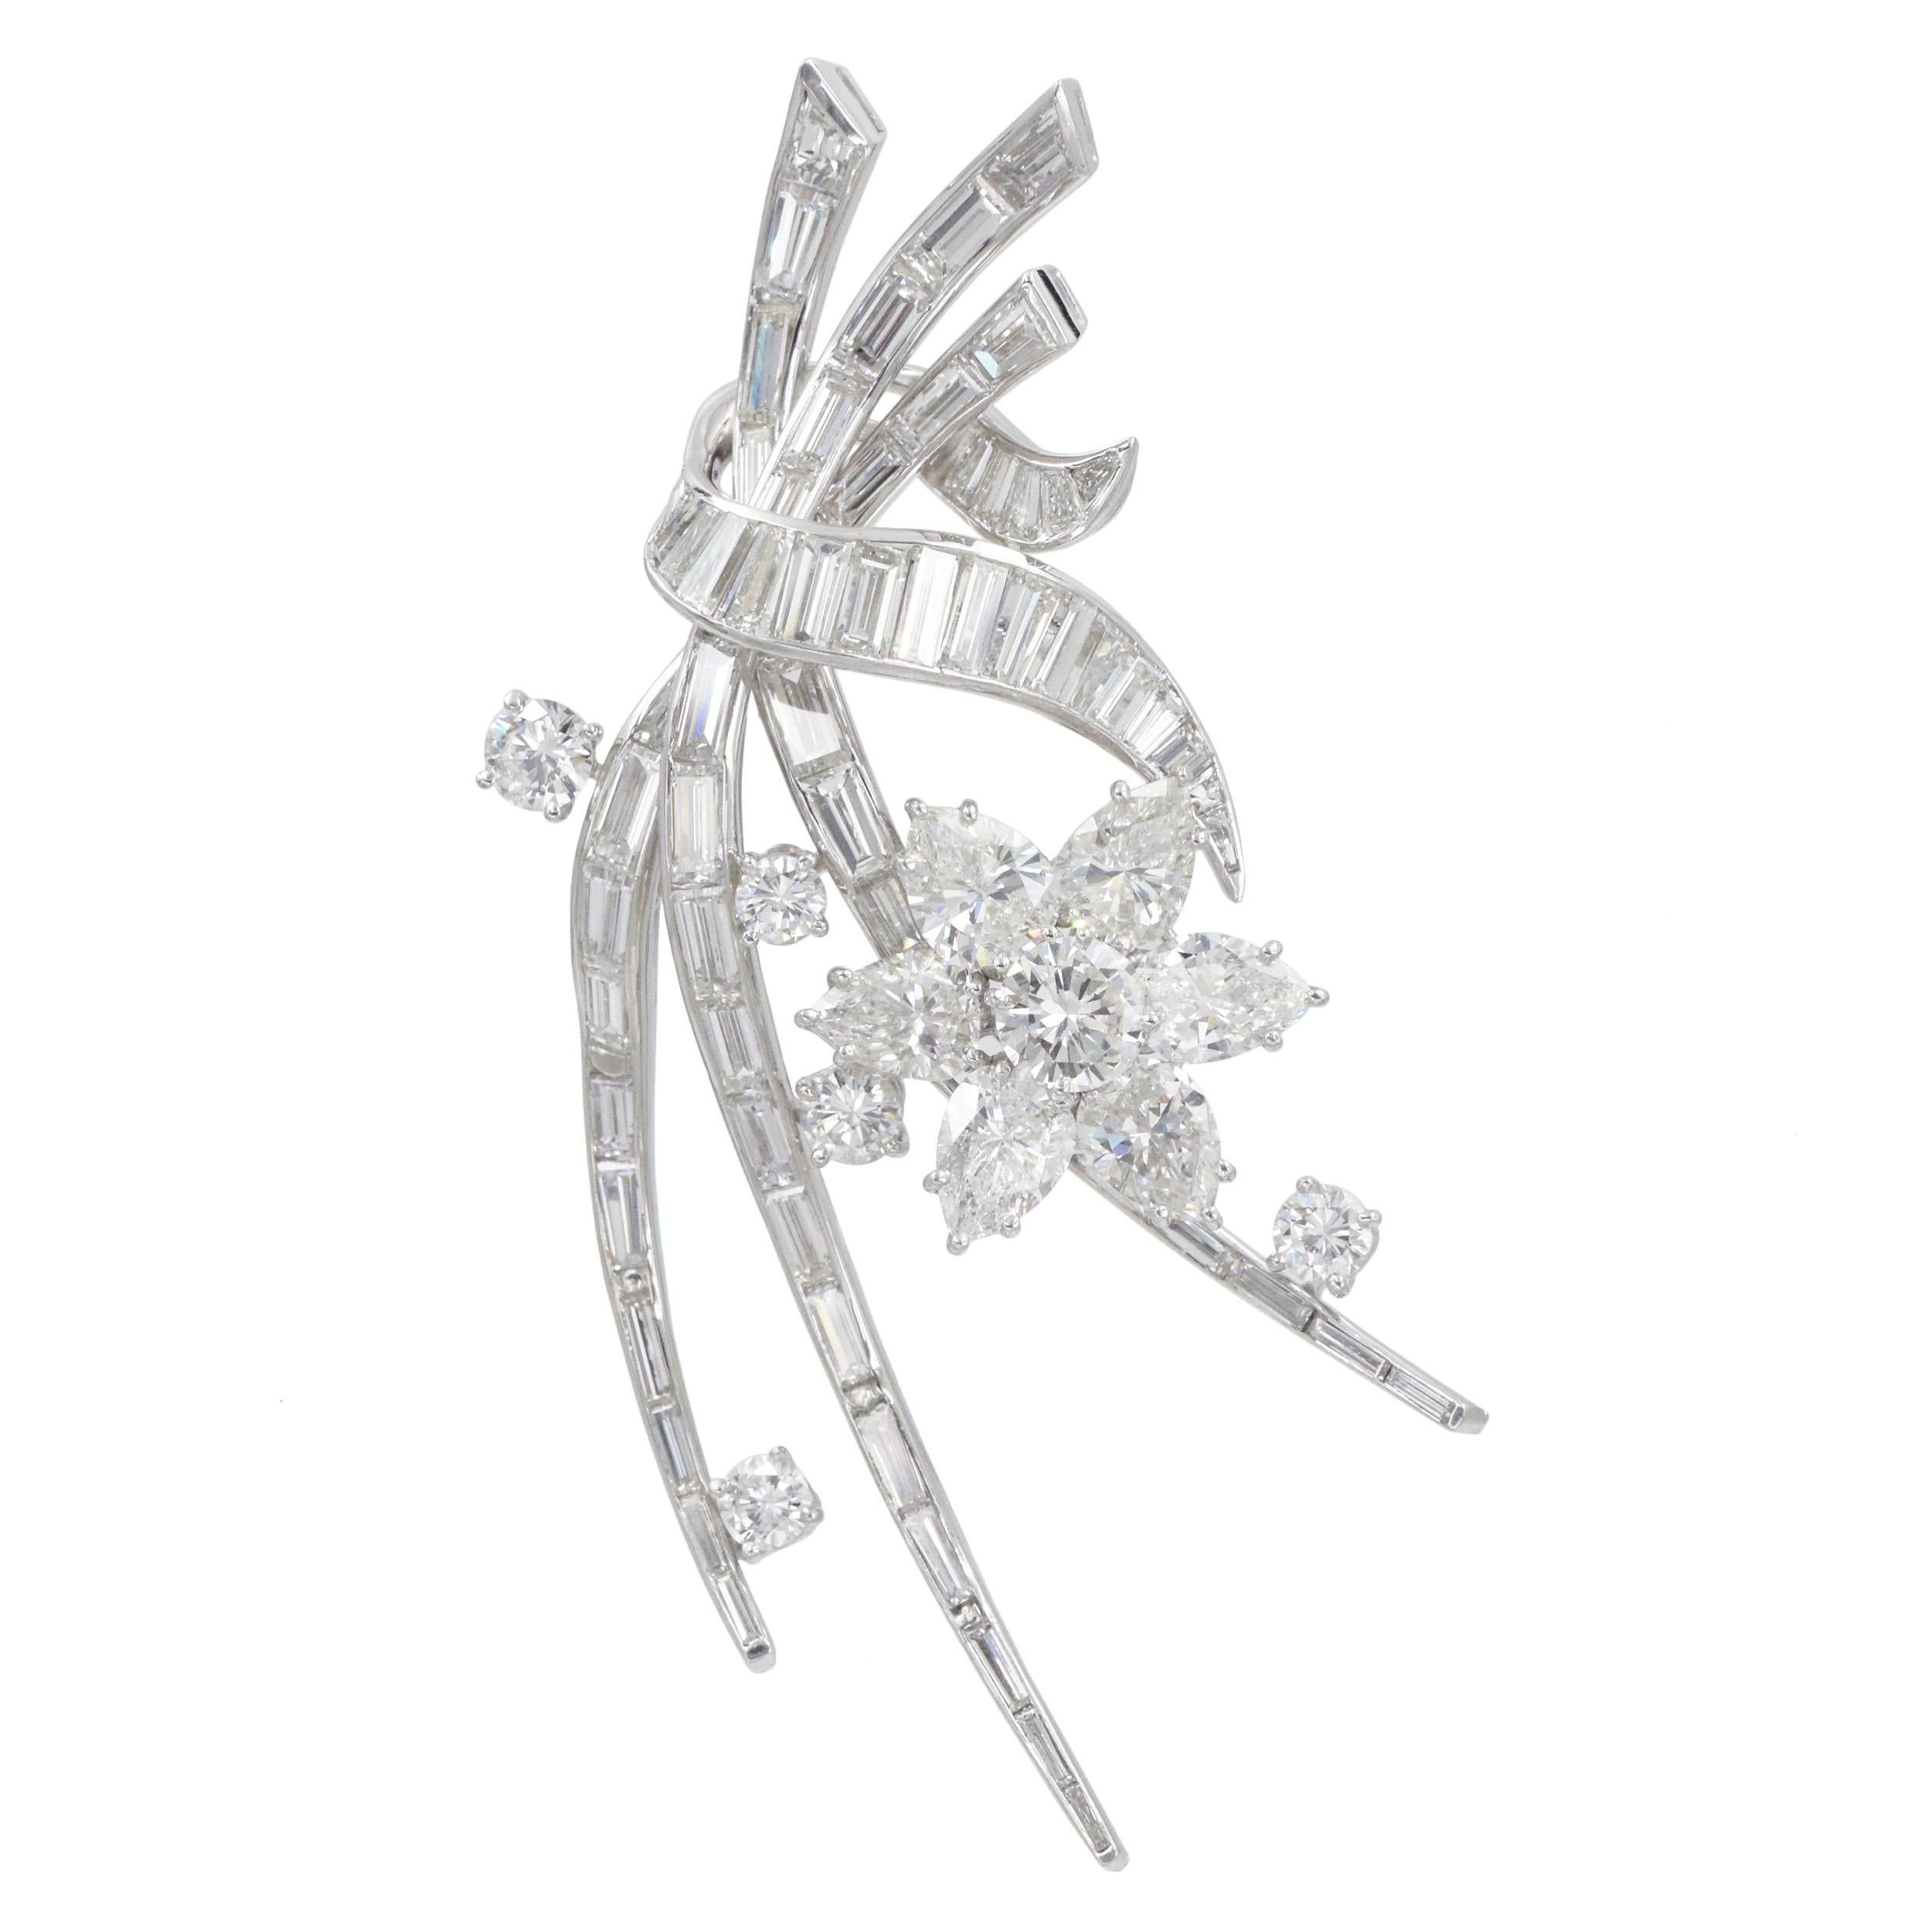 Art Deco  Diamond Floral Brooch In Platinum. 
Center of the flower set with round brilliant cut diamond weighing approximately 0.70ct, petals set with 6 pear-shaped diamonds ap. 3.40ct. Accented with 5 round diamonds ap. 0.90ct; and 64 tapered and